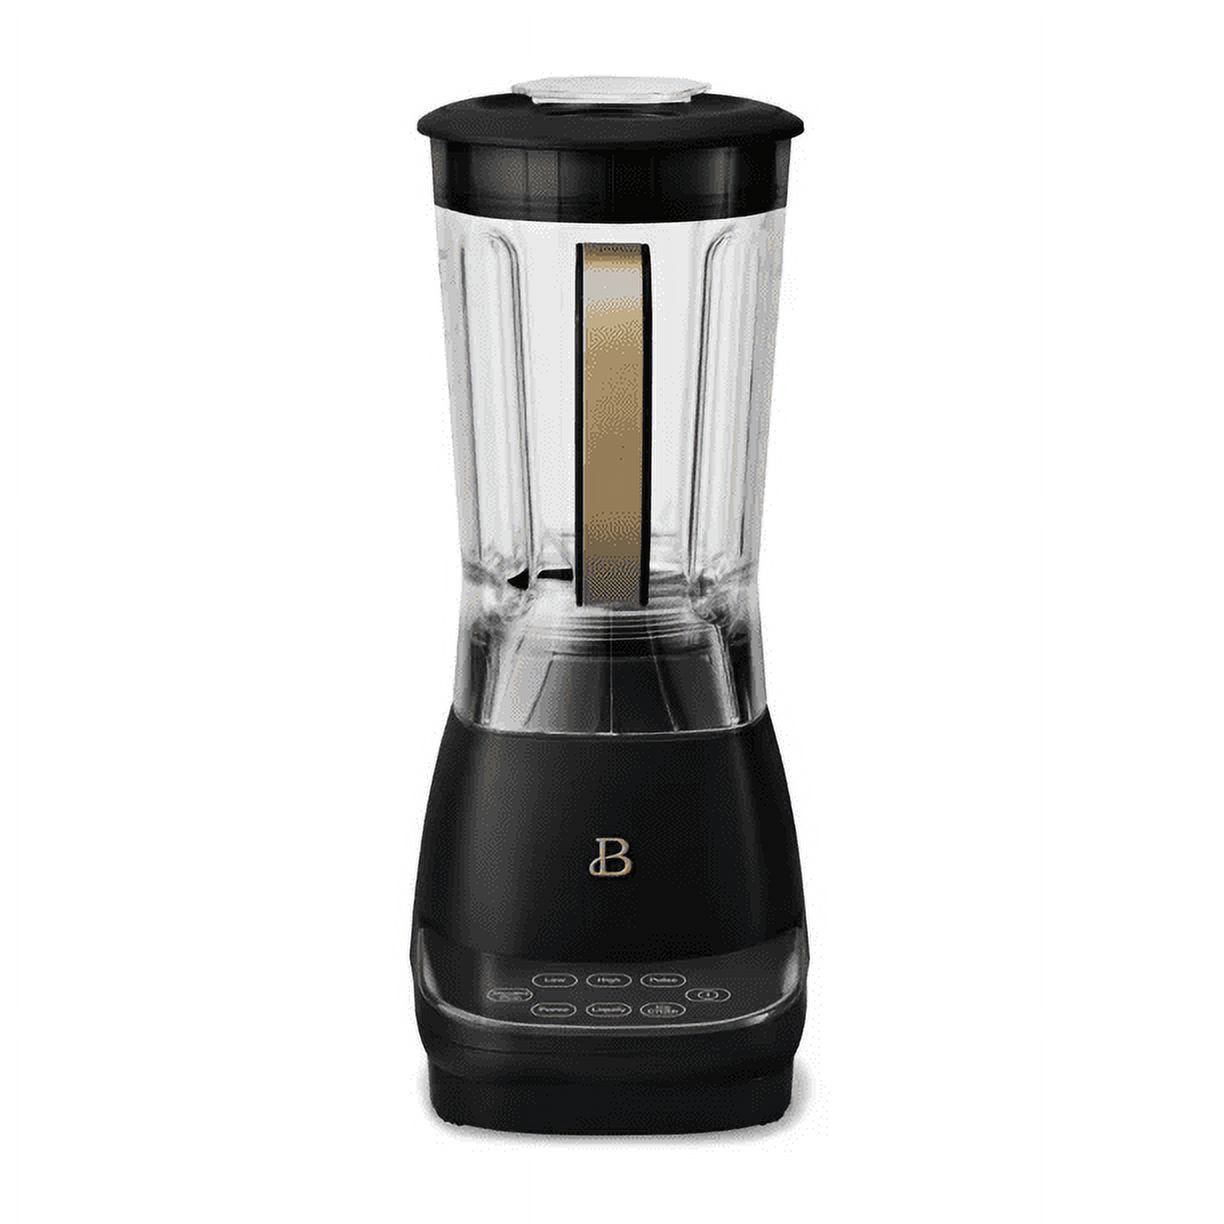 Beautiful High Performance Touchscreen Blender, Black Sesame by Drew Barrymore - image 1 of 4